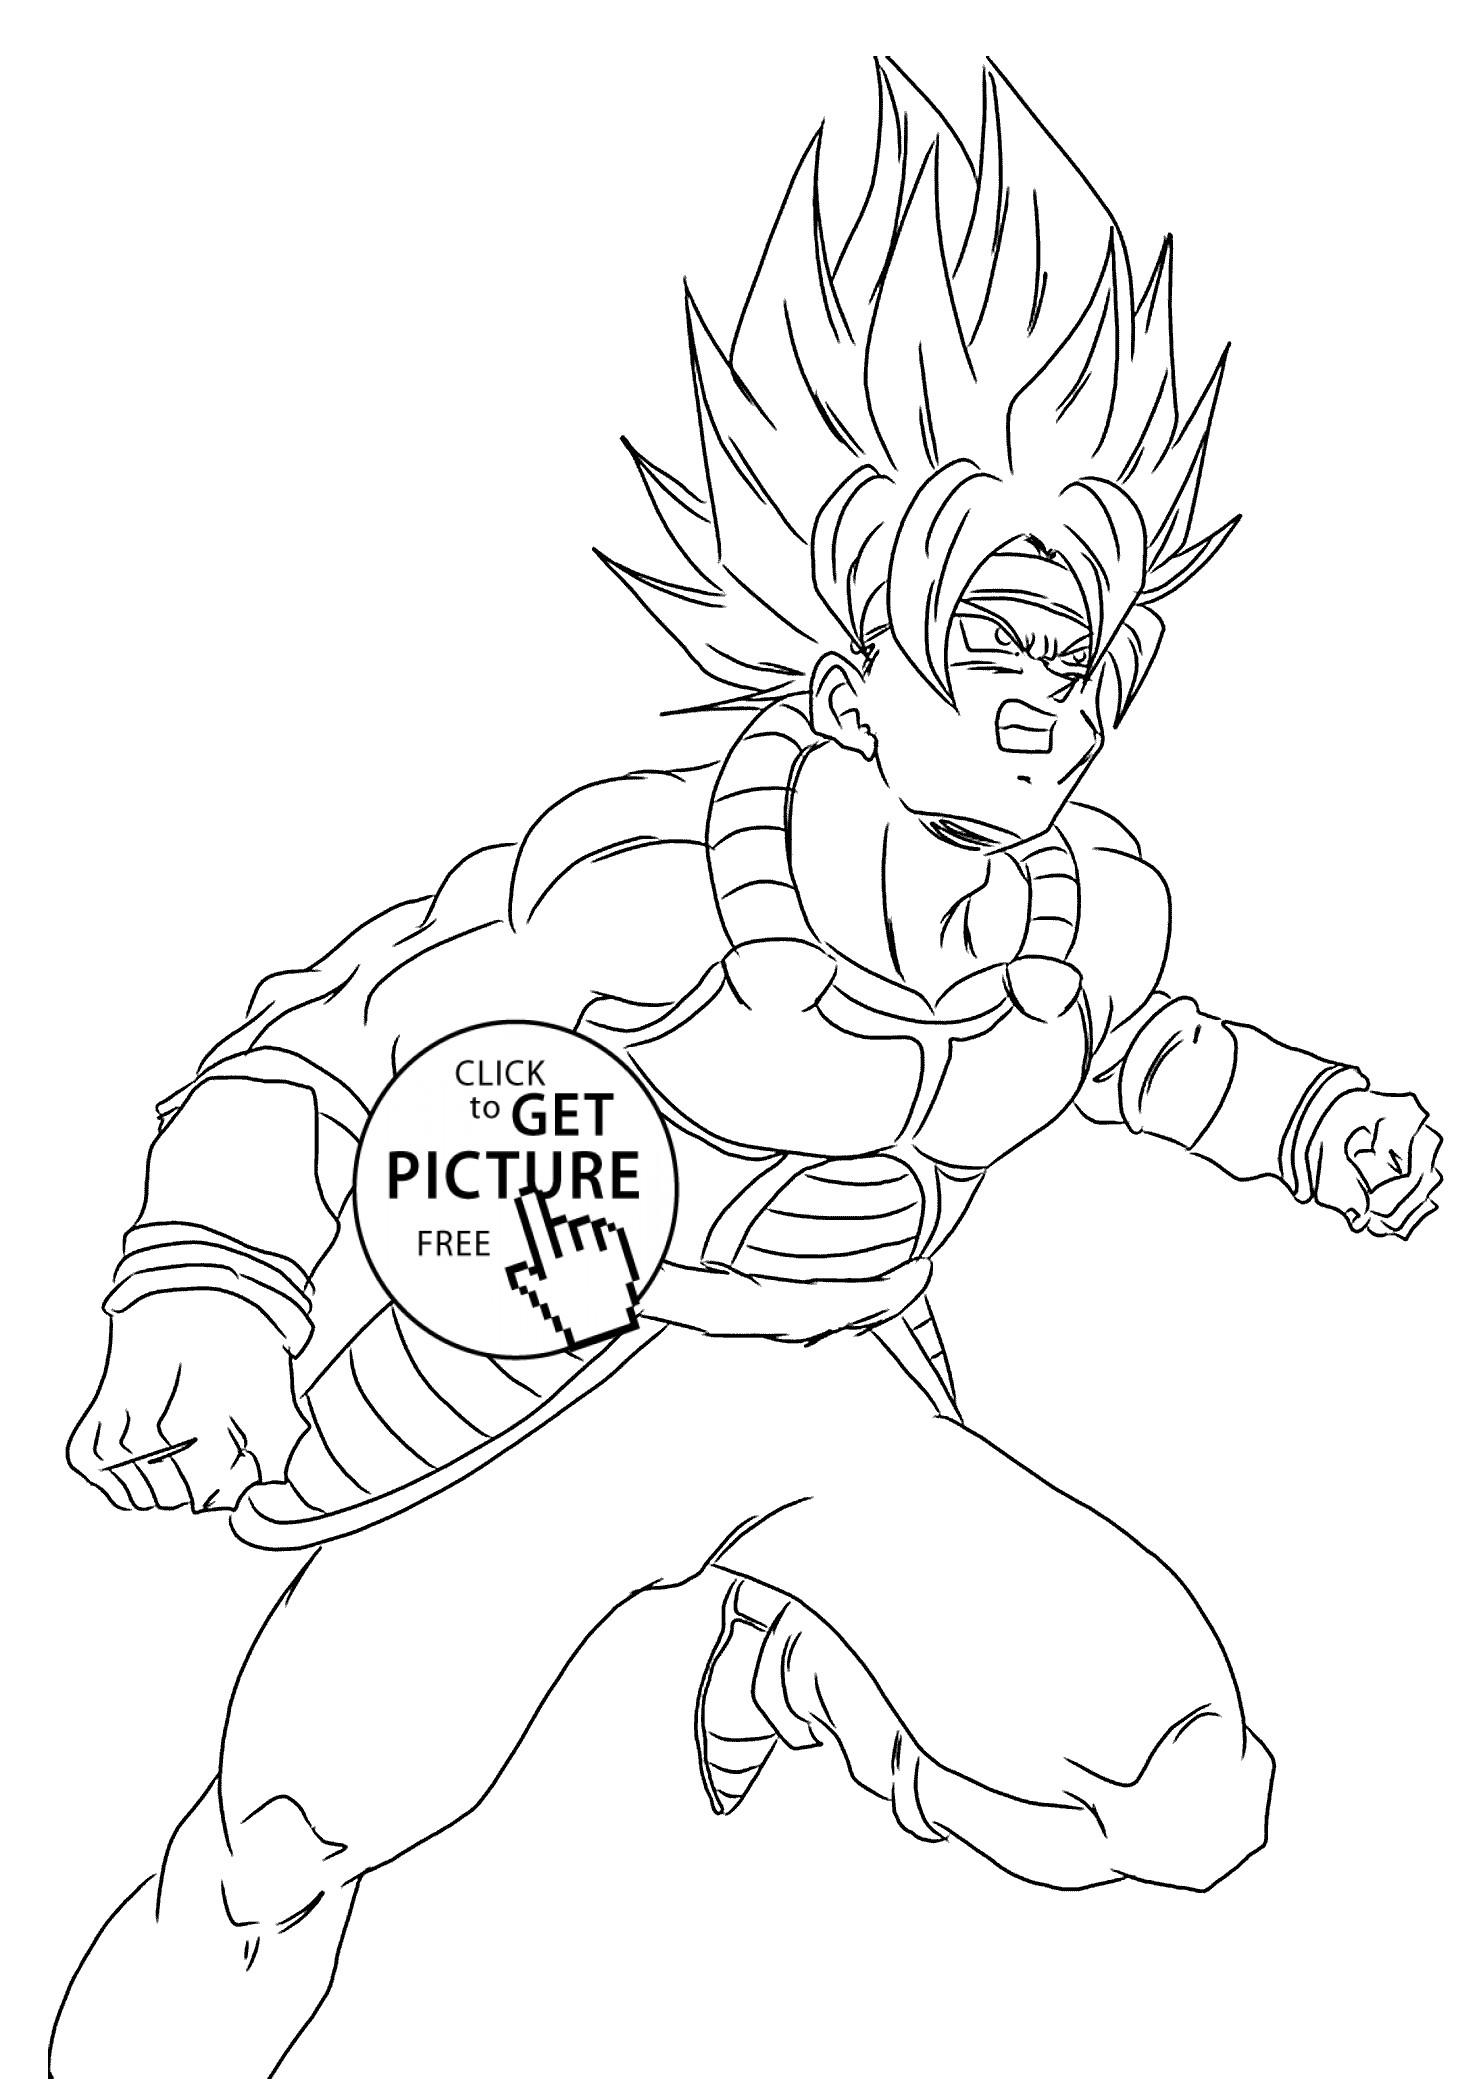 Free Dragon Ball Z Coloring Pages For Kids
 Kai Dragon ball Z anime coloring pages for kids printable